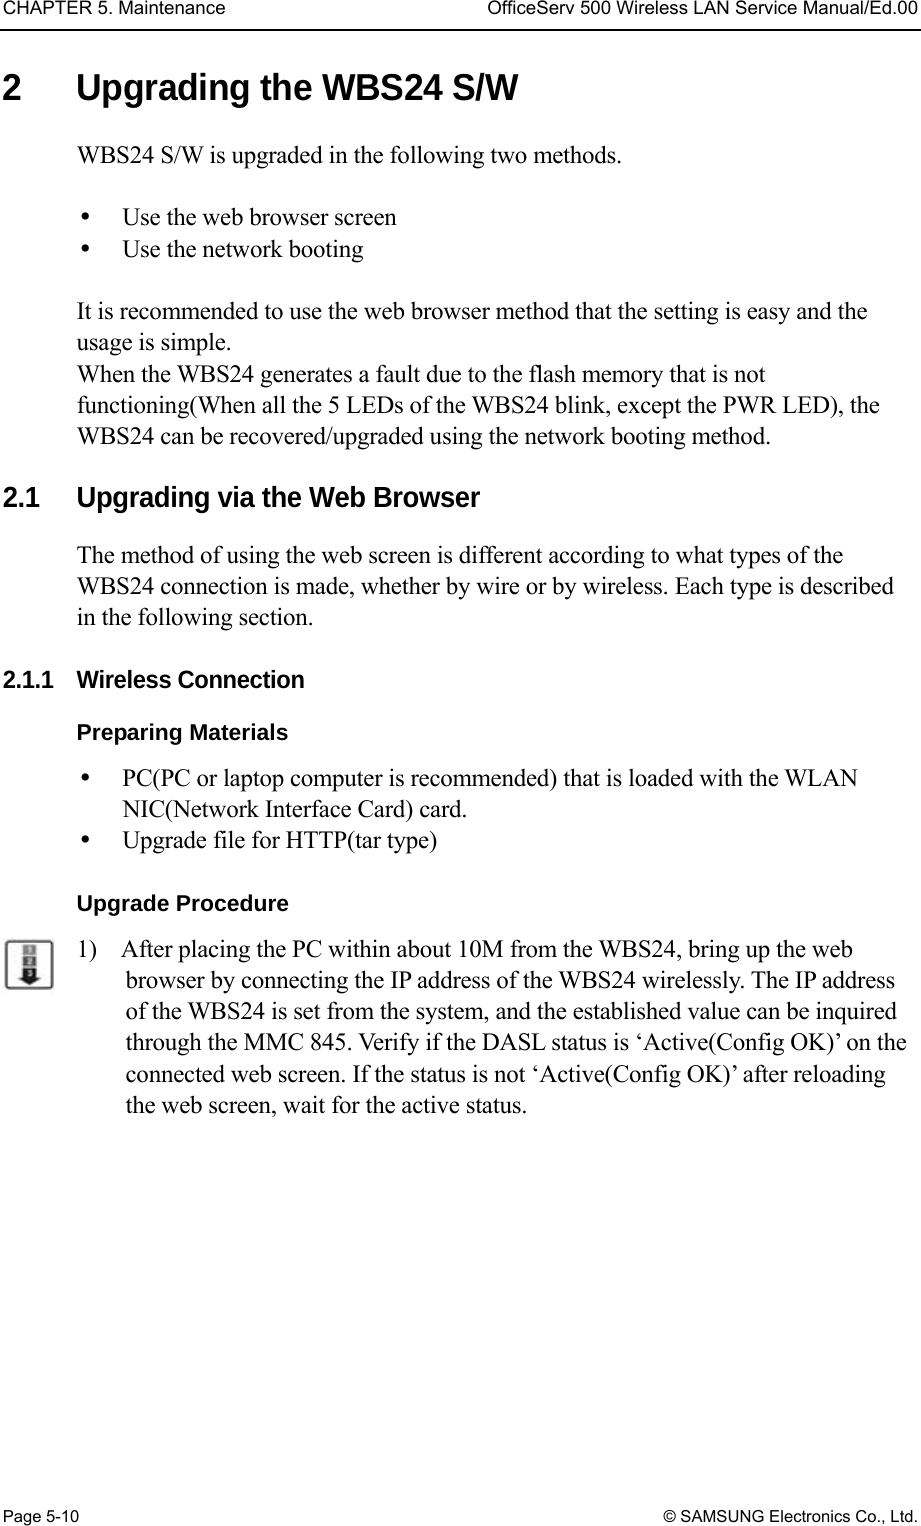 CHAPTER 5. Maintenance  OfficeServ 500 Wireless LAN Service Manual/Ed.00 Page 5-10 © SAMSUNG Electronics Co., Ltd. 2  Upgrading the WBS24 S/W   WBS24 S/W is upgraded in the following two methods.    Use the web browser screen   Use the network booting    It is recommended to use the web browser method that the setting is easy and the usage is simple. When the WBS24 generates a fault due to the flash memory that is not functioning(When all the 5 LEDs of the WBS24 blink, except the PWR LED), the WBS24 can be recovered/upgraded using the network booting method.    2.1  Upgrading via the Web Browser The method of using the web screen is different according to what types of the WBS24 connection is made, whether by wire or by wireless. Each type is described in the following section.  2.1.1 Wireless Connection  Preparing Materials   PC(PC or laptop computer is recommended) that is loaded with the WLAN NIC(Network Interface Card) card.     Upgrade file for HTTP(tar type)  Upgrade Procedure   1)    After placing the PC within about 10M from the WBS24, bring up the web browser by connecting the IP address of the WBS24 wirelessly. The IP address of the WBS24 is set from the system, and the established value can be inquired through the MMC 845. Verify if the DASL status is ‘Active(Config OK)’ on the connected web screen. If the status is not ‘Active(Config OK)’ after reloading the web screen, wait for the active status. 